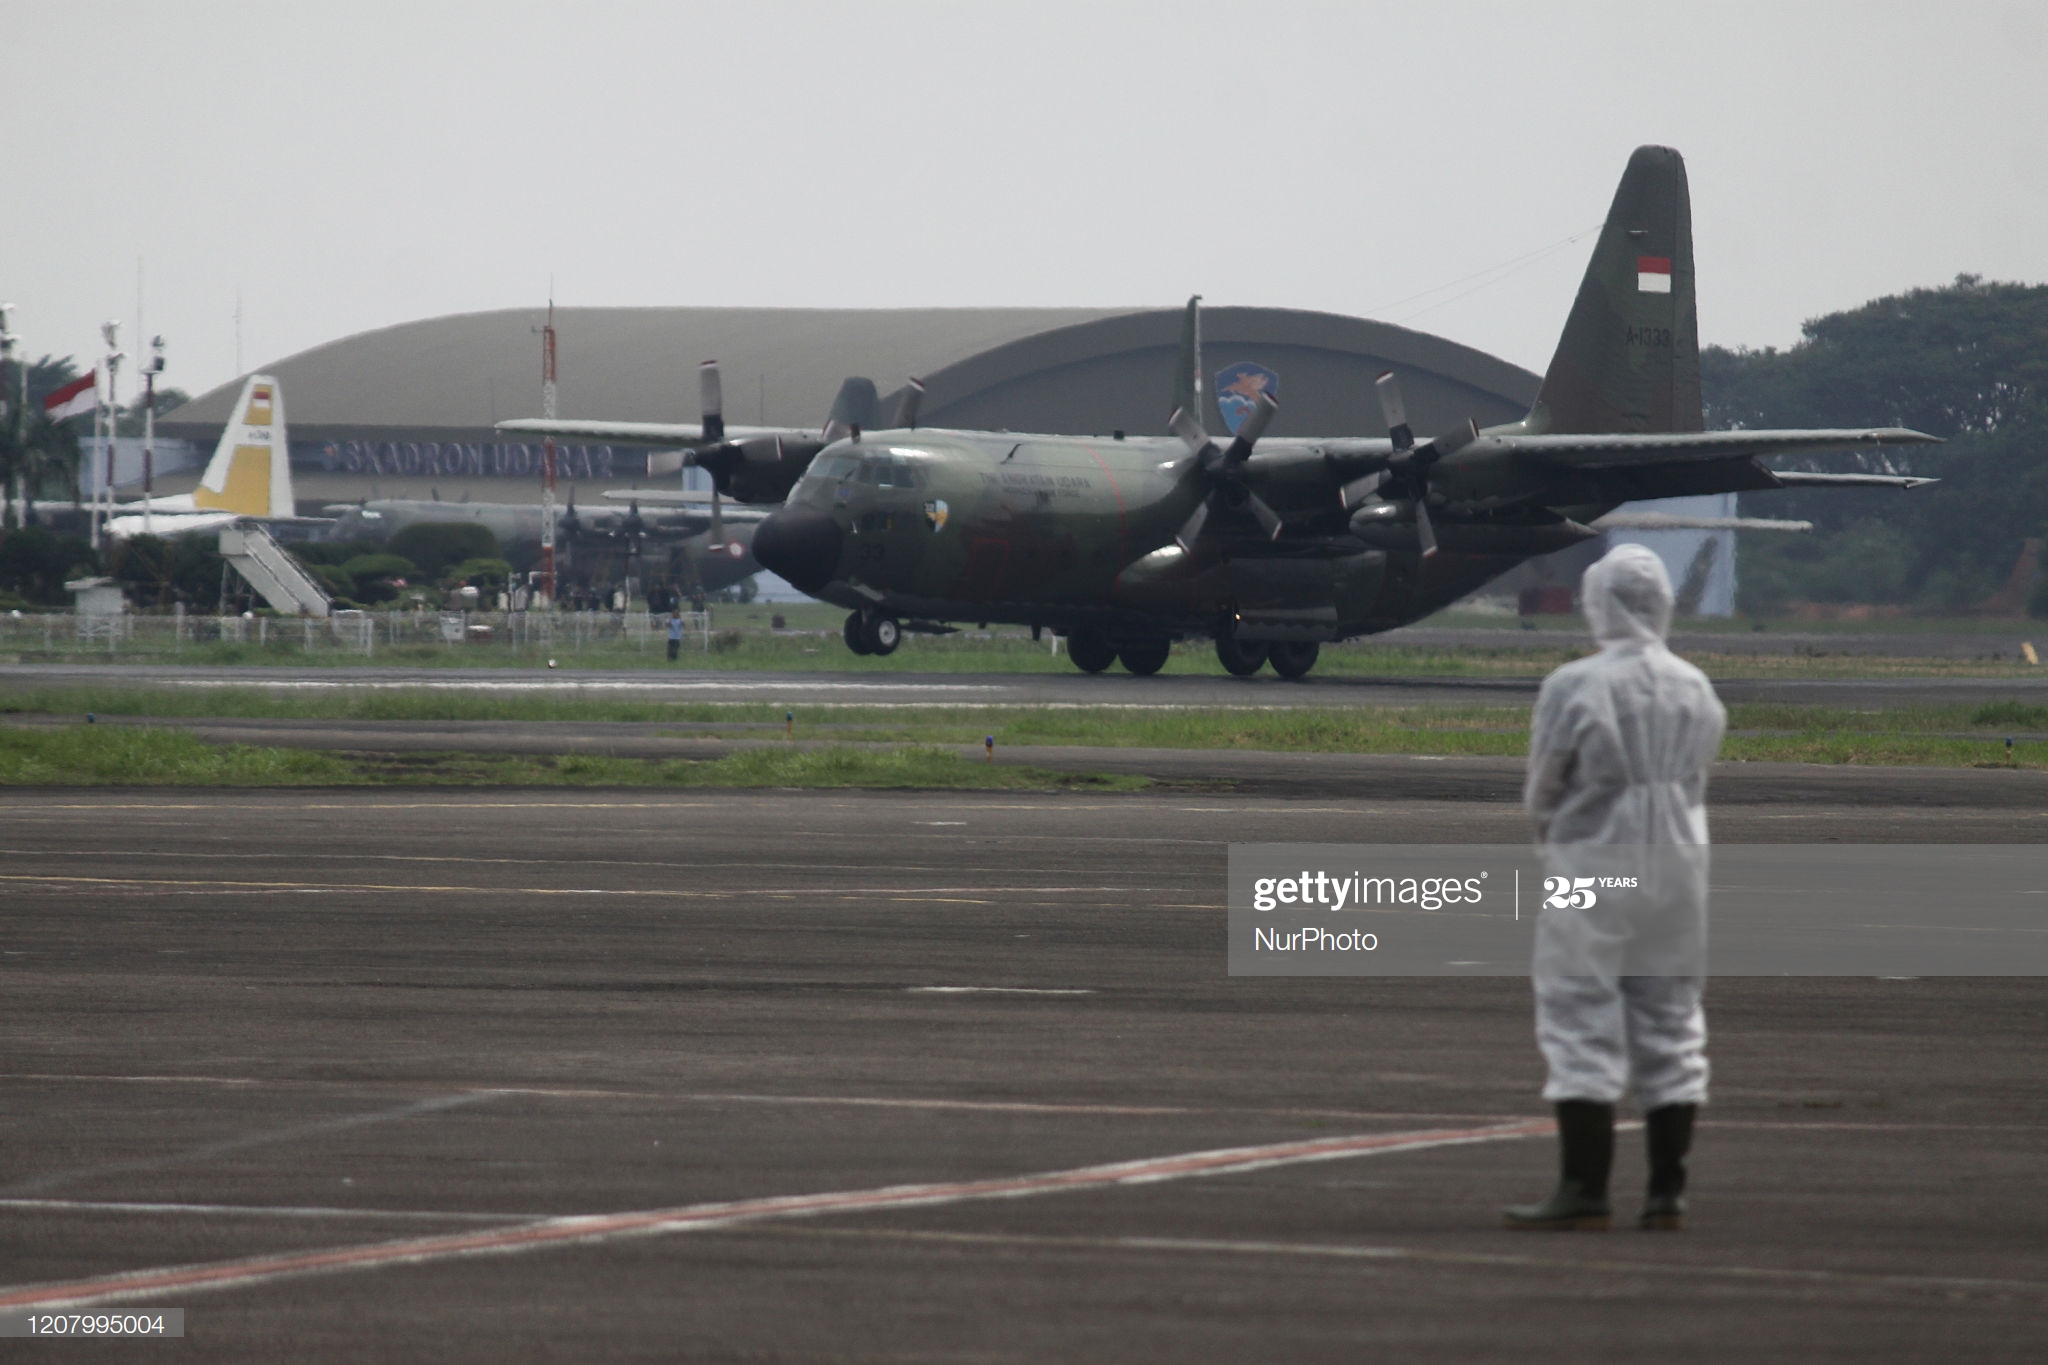 military-aircraft-of-indonesian-air-force-which-carrying-9-tons-of-picture-id1207995004